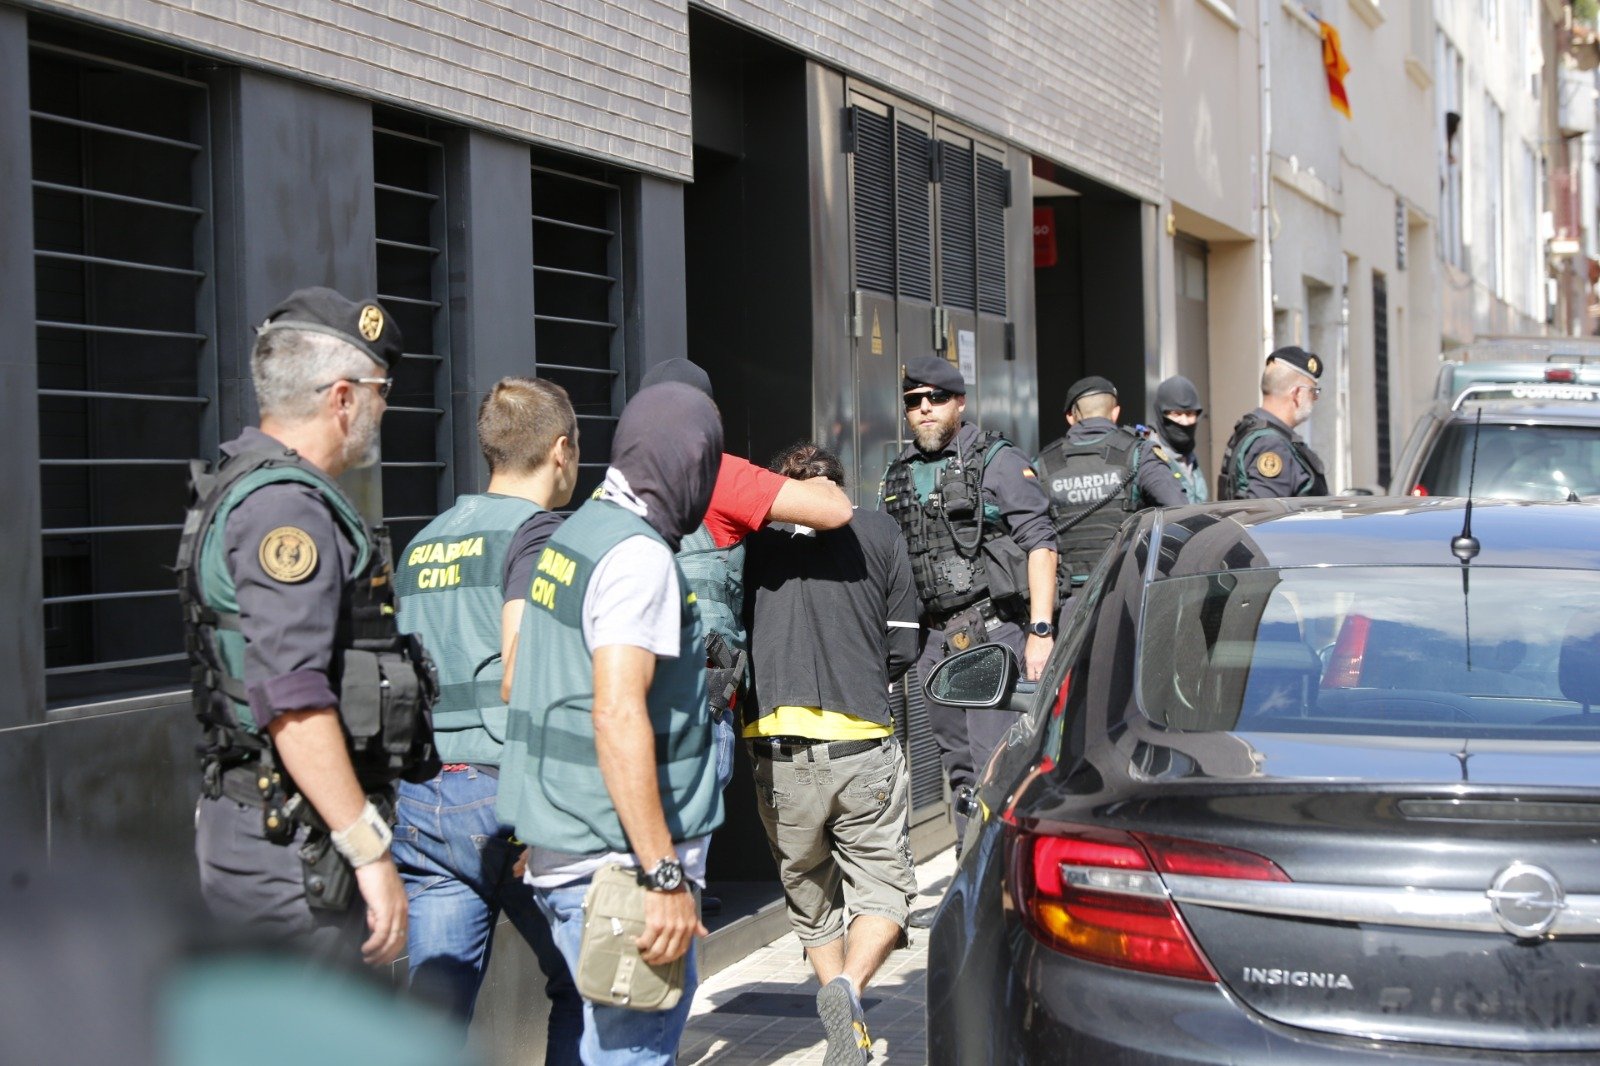 Catalans arrested in "terrorism" raid, yet terrorism protocol is not being applied